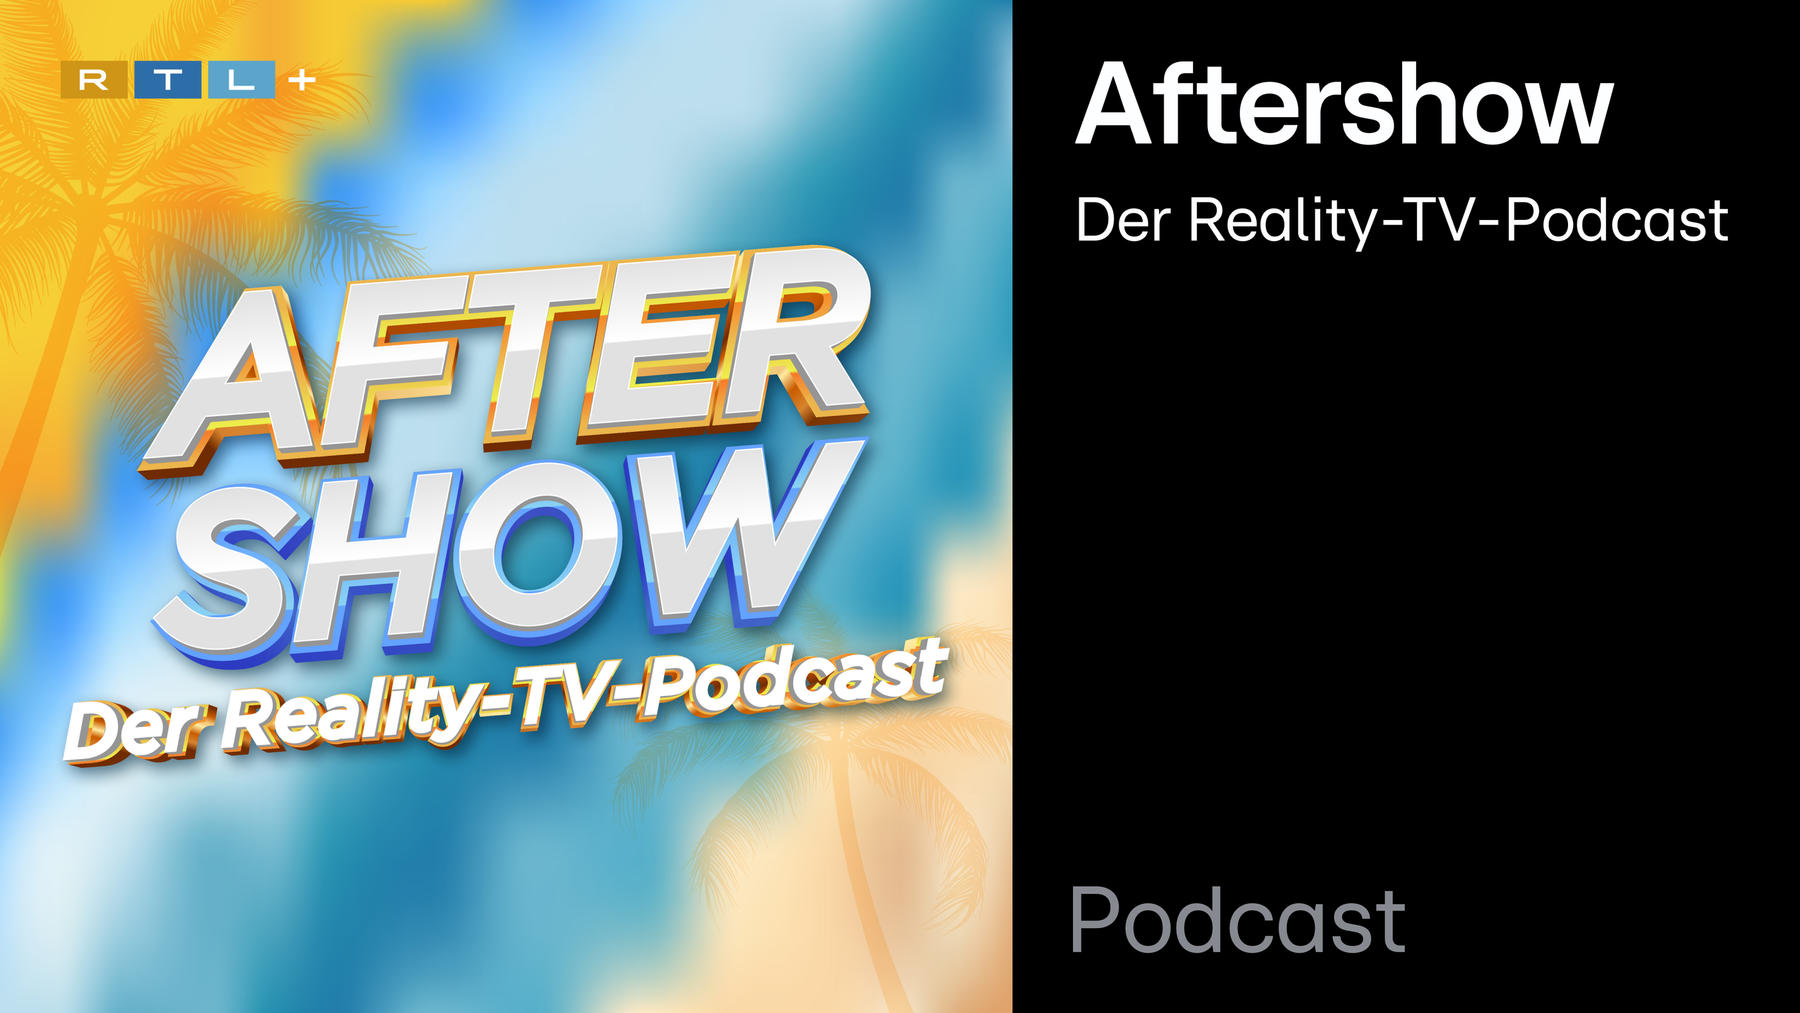 Podcast: Are You The One? Aftershow - der Reality-TV-Podcast